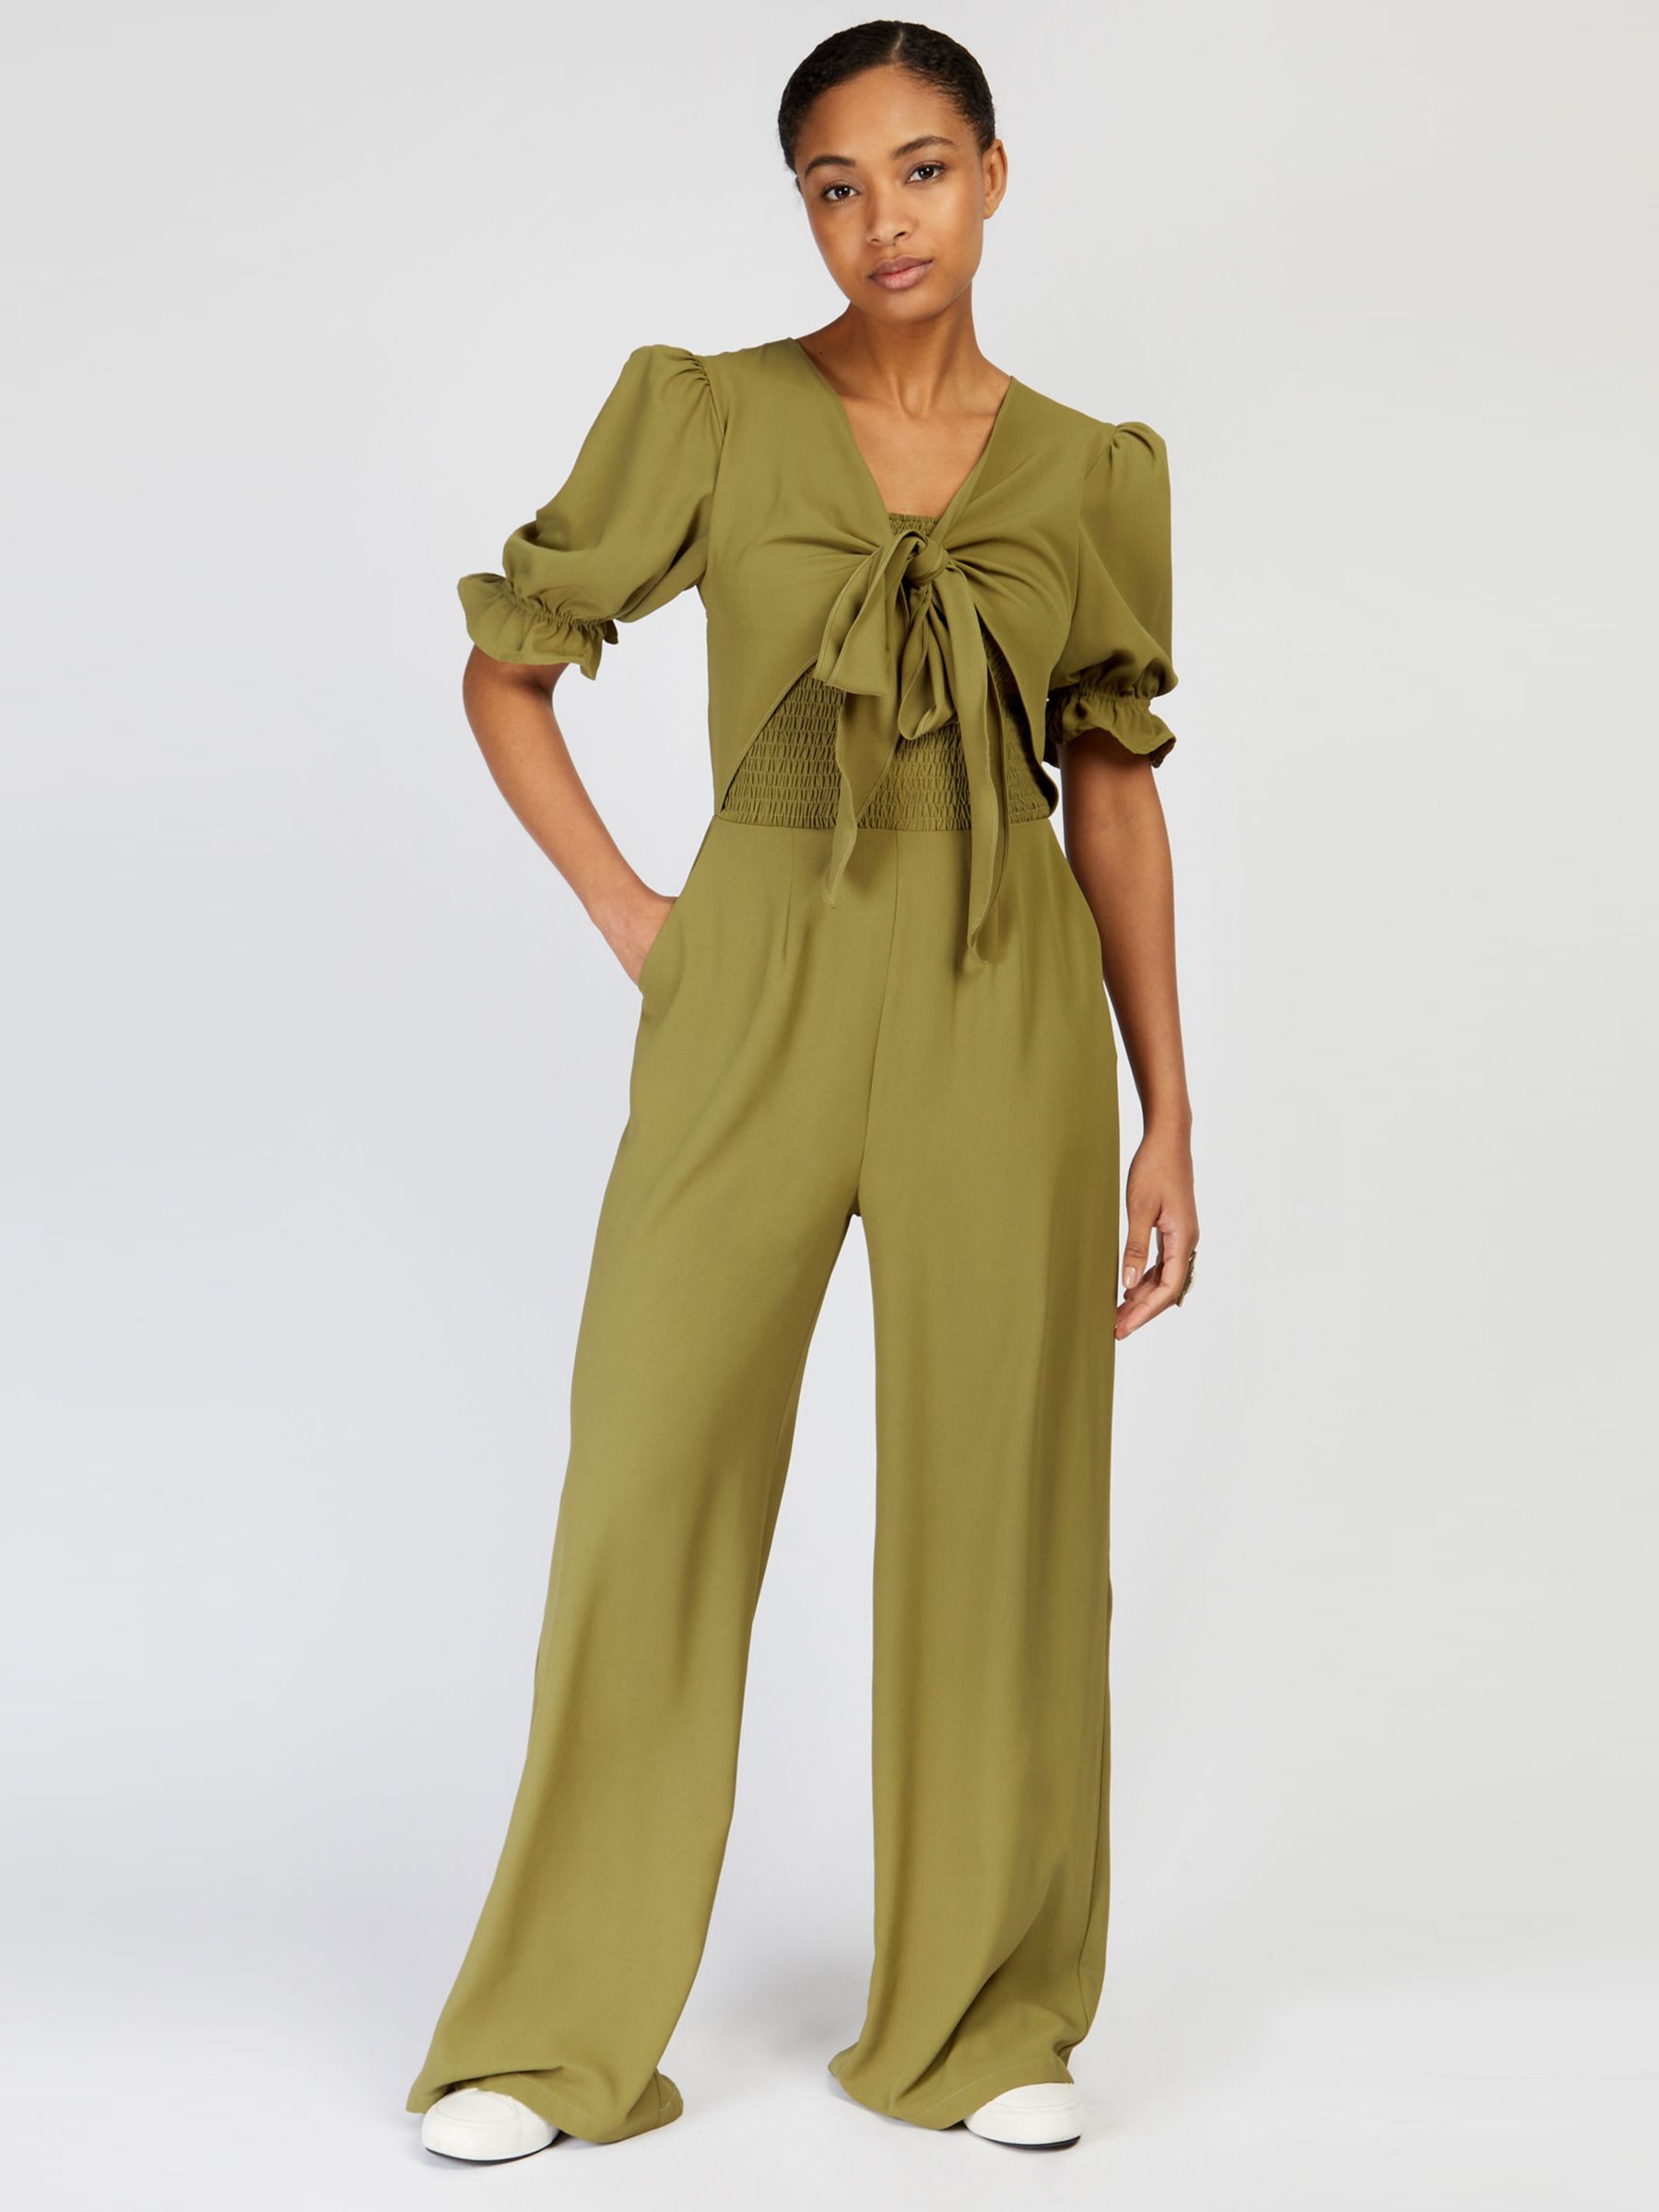 Somerset by Alice Temperley Tie Neck Wide Leg Jumpsuit, Olive Green, 8